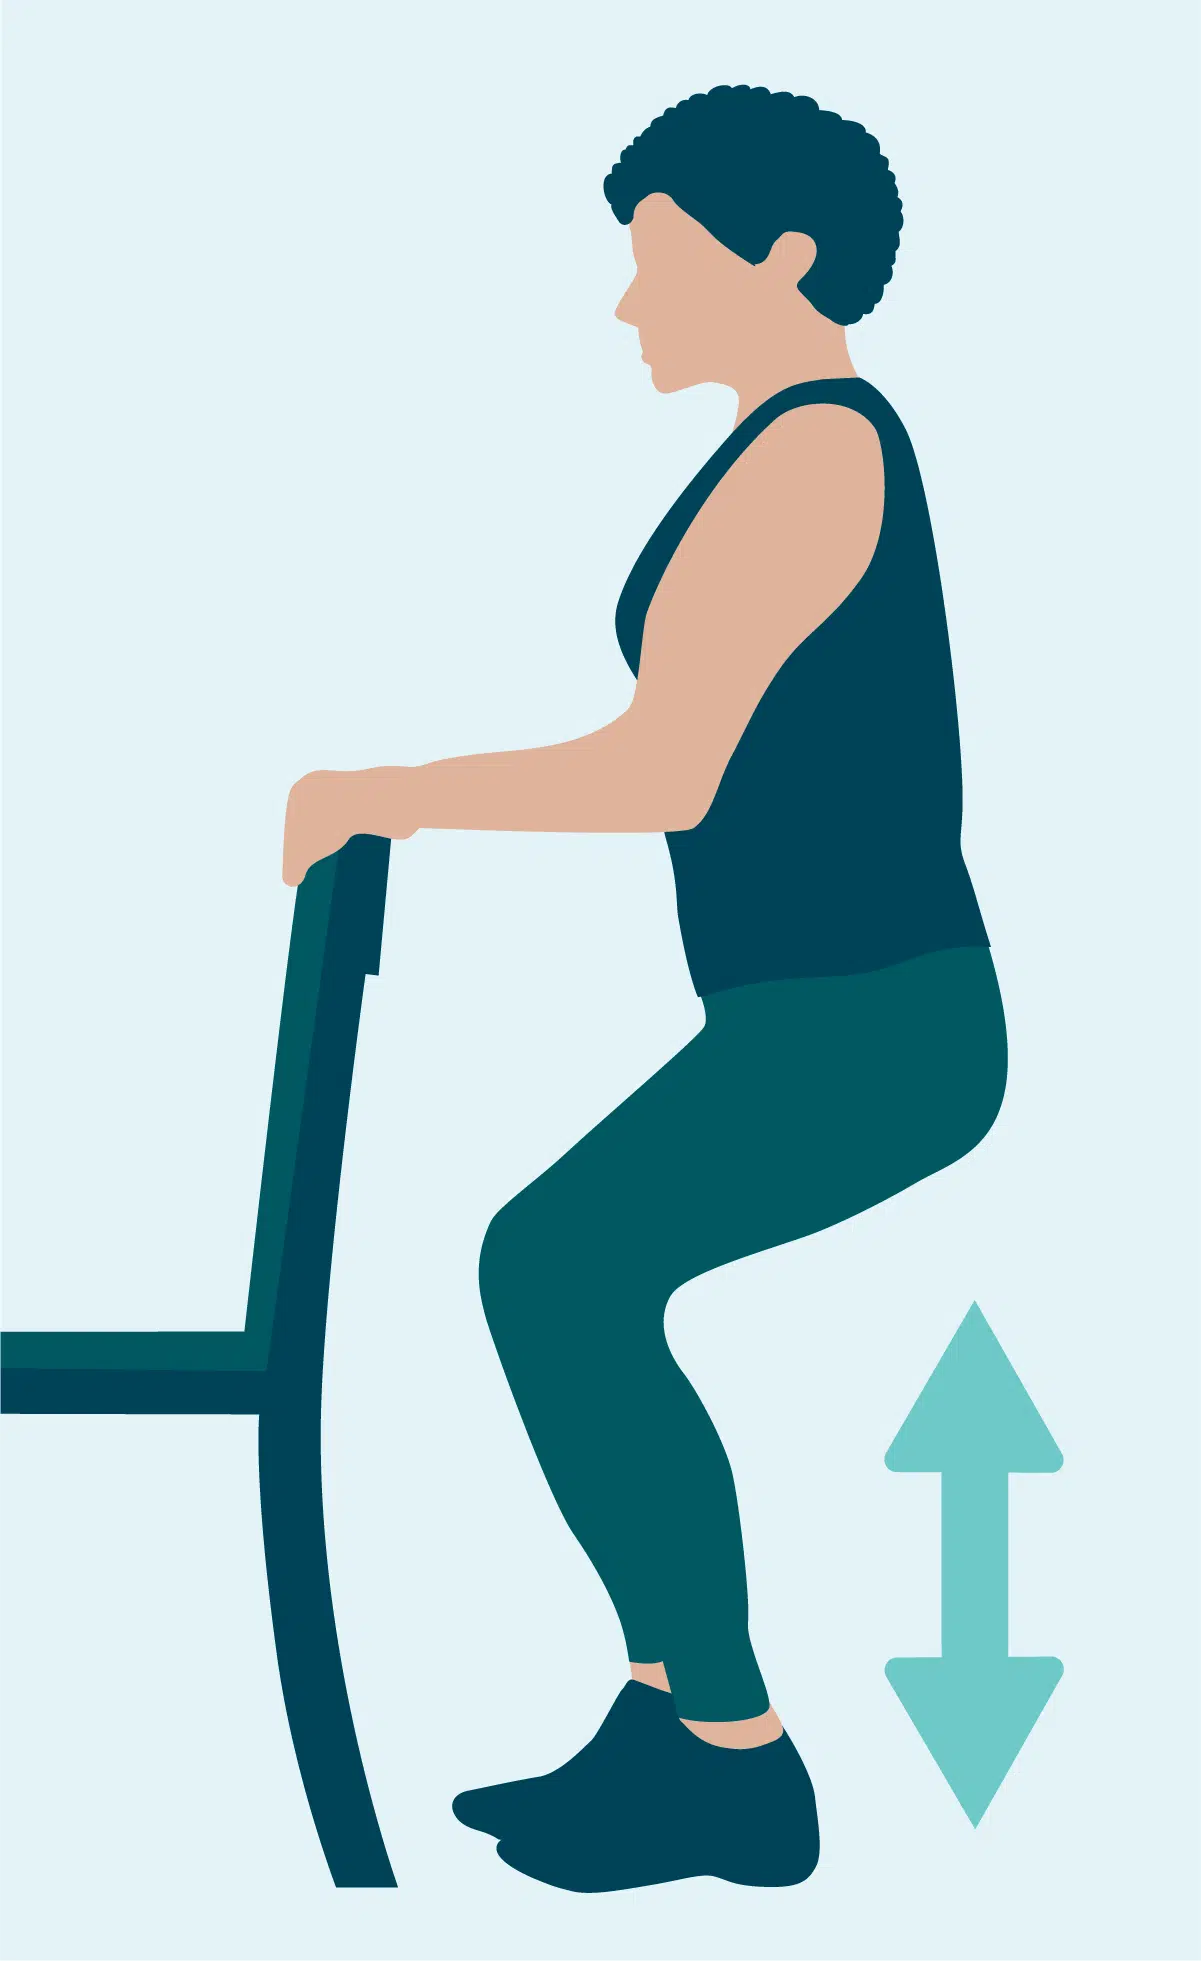 The 9 Chair Exercises Seniors Can Do for Better Health and